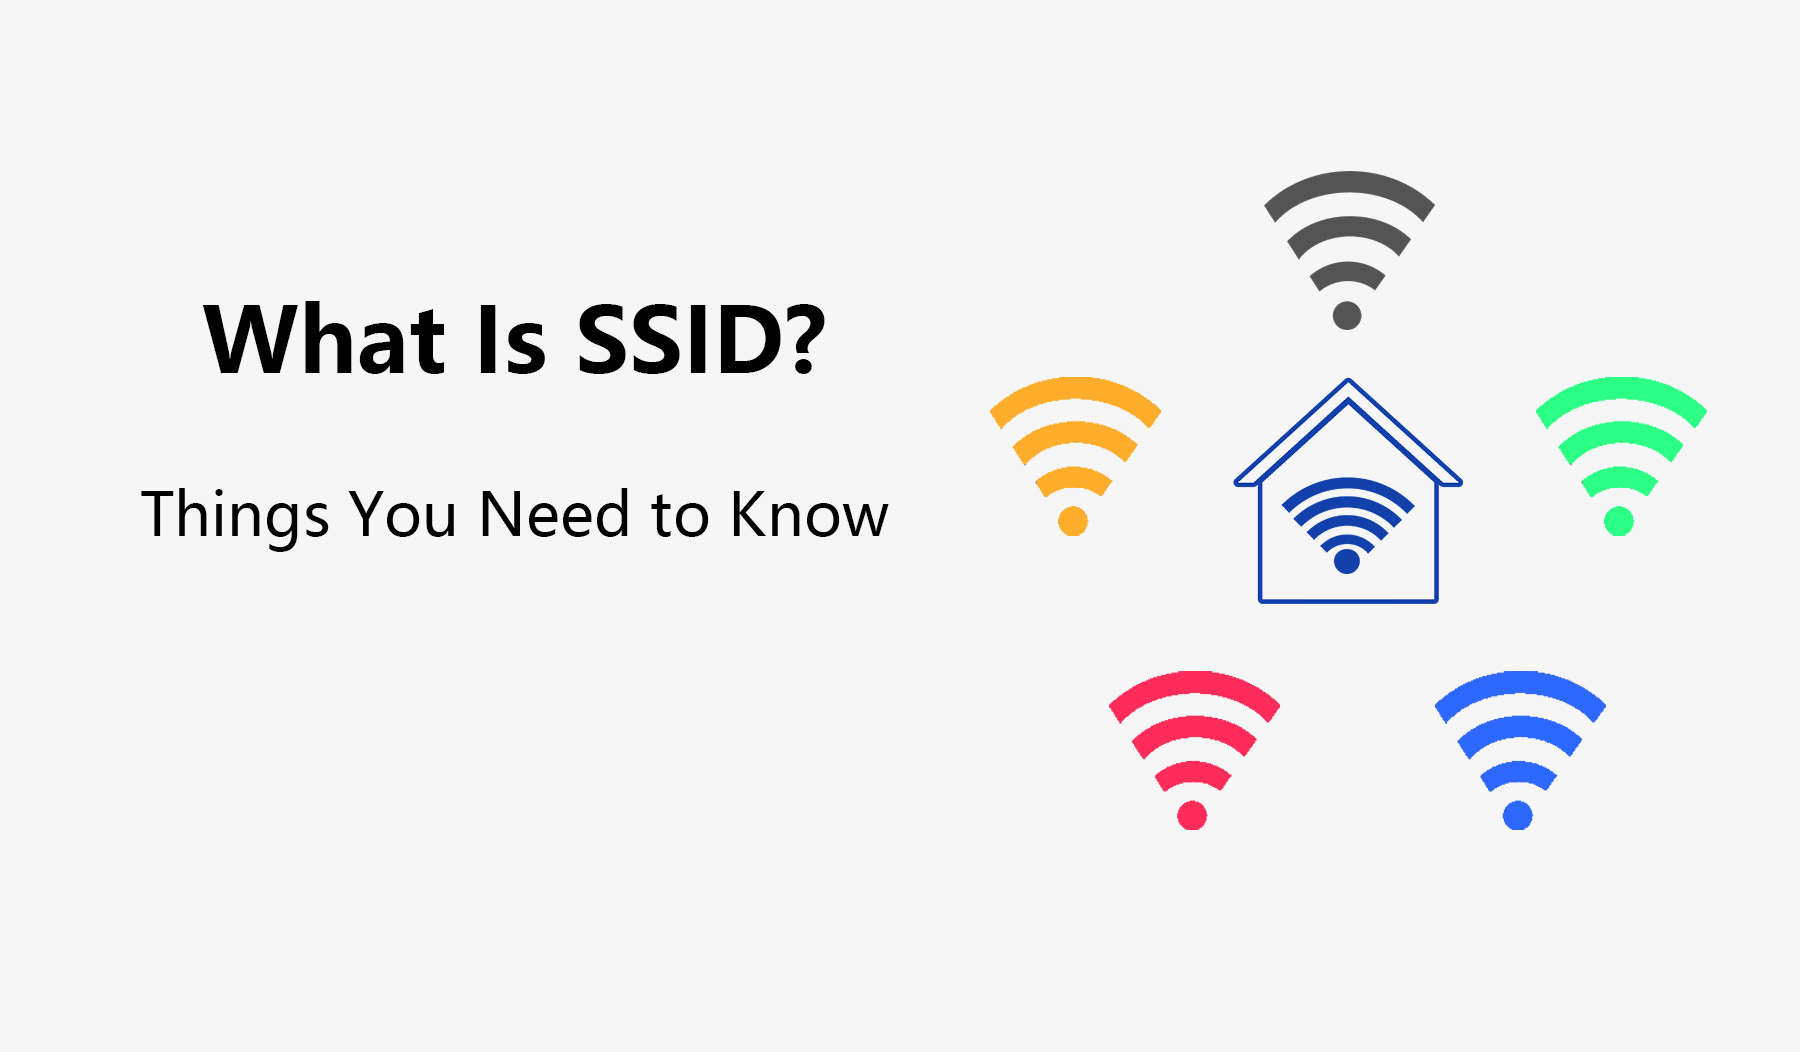 What Is SSID?